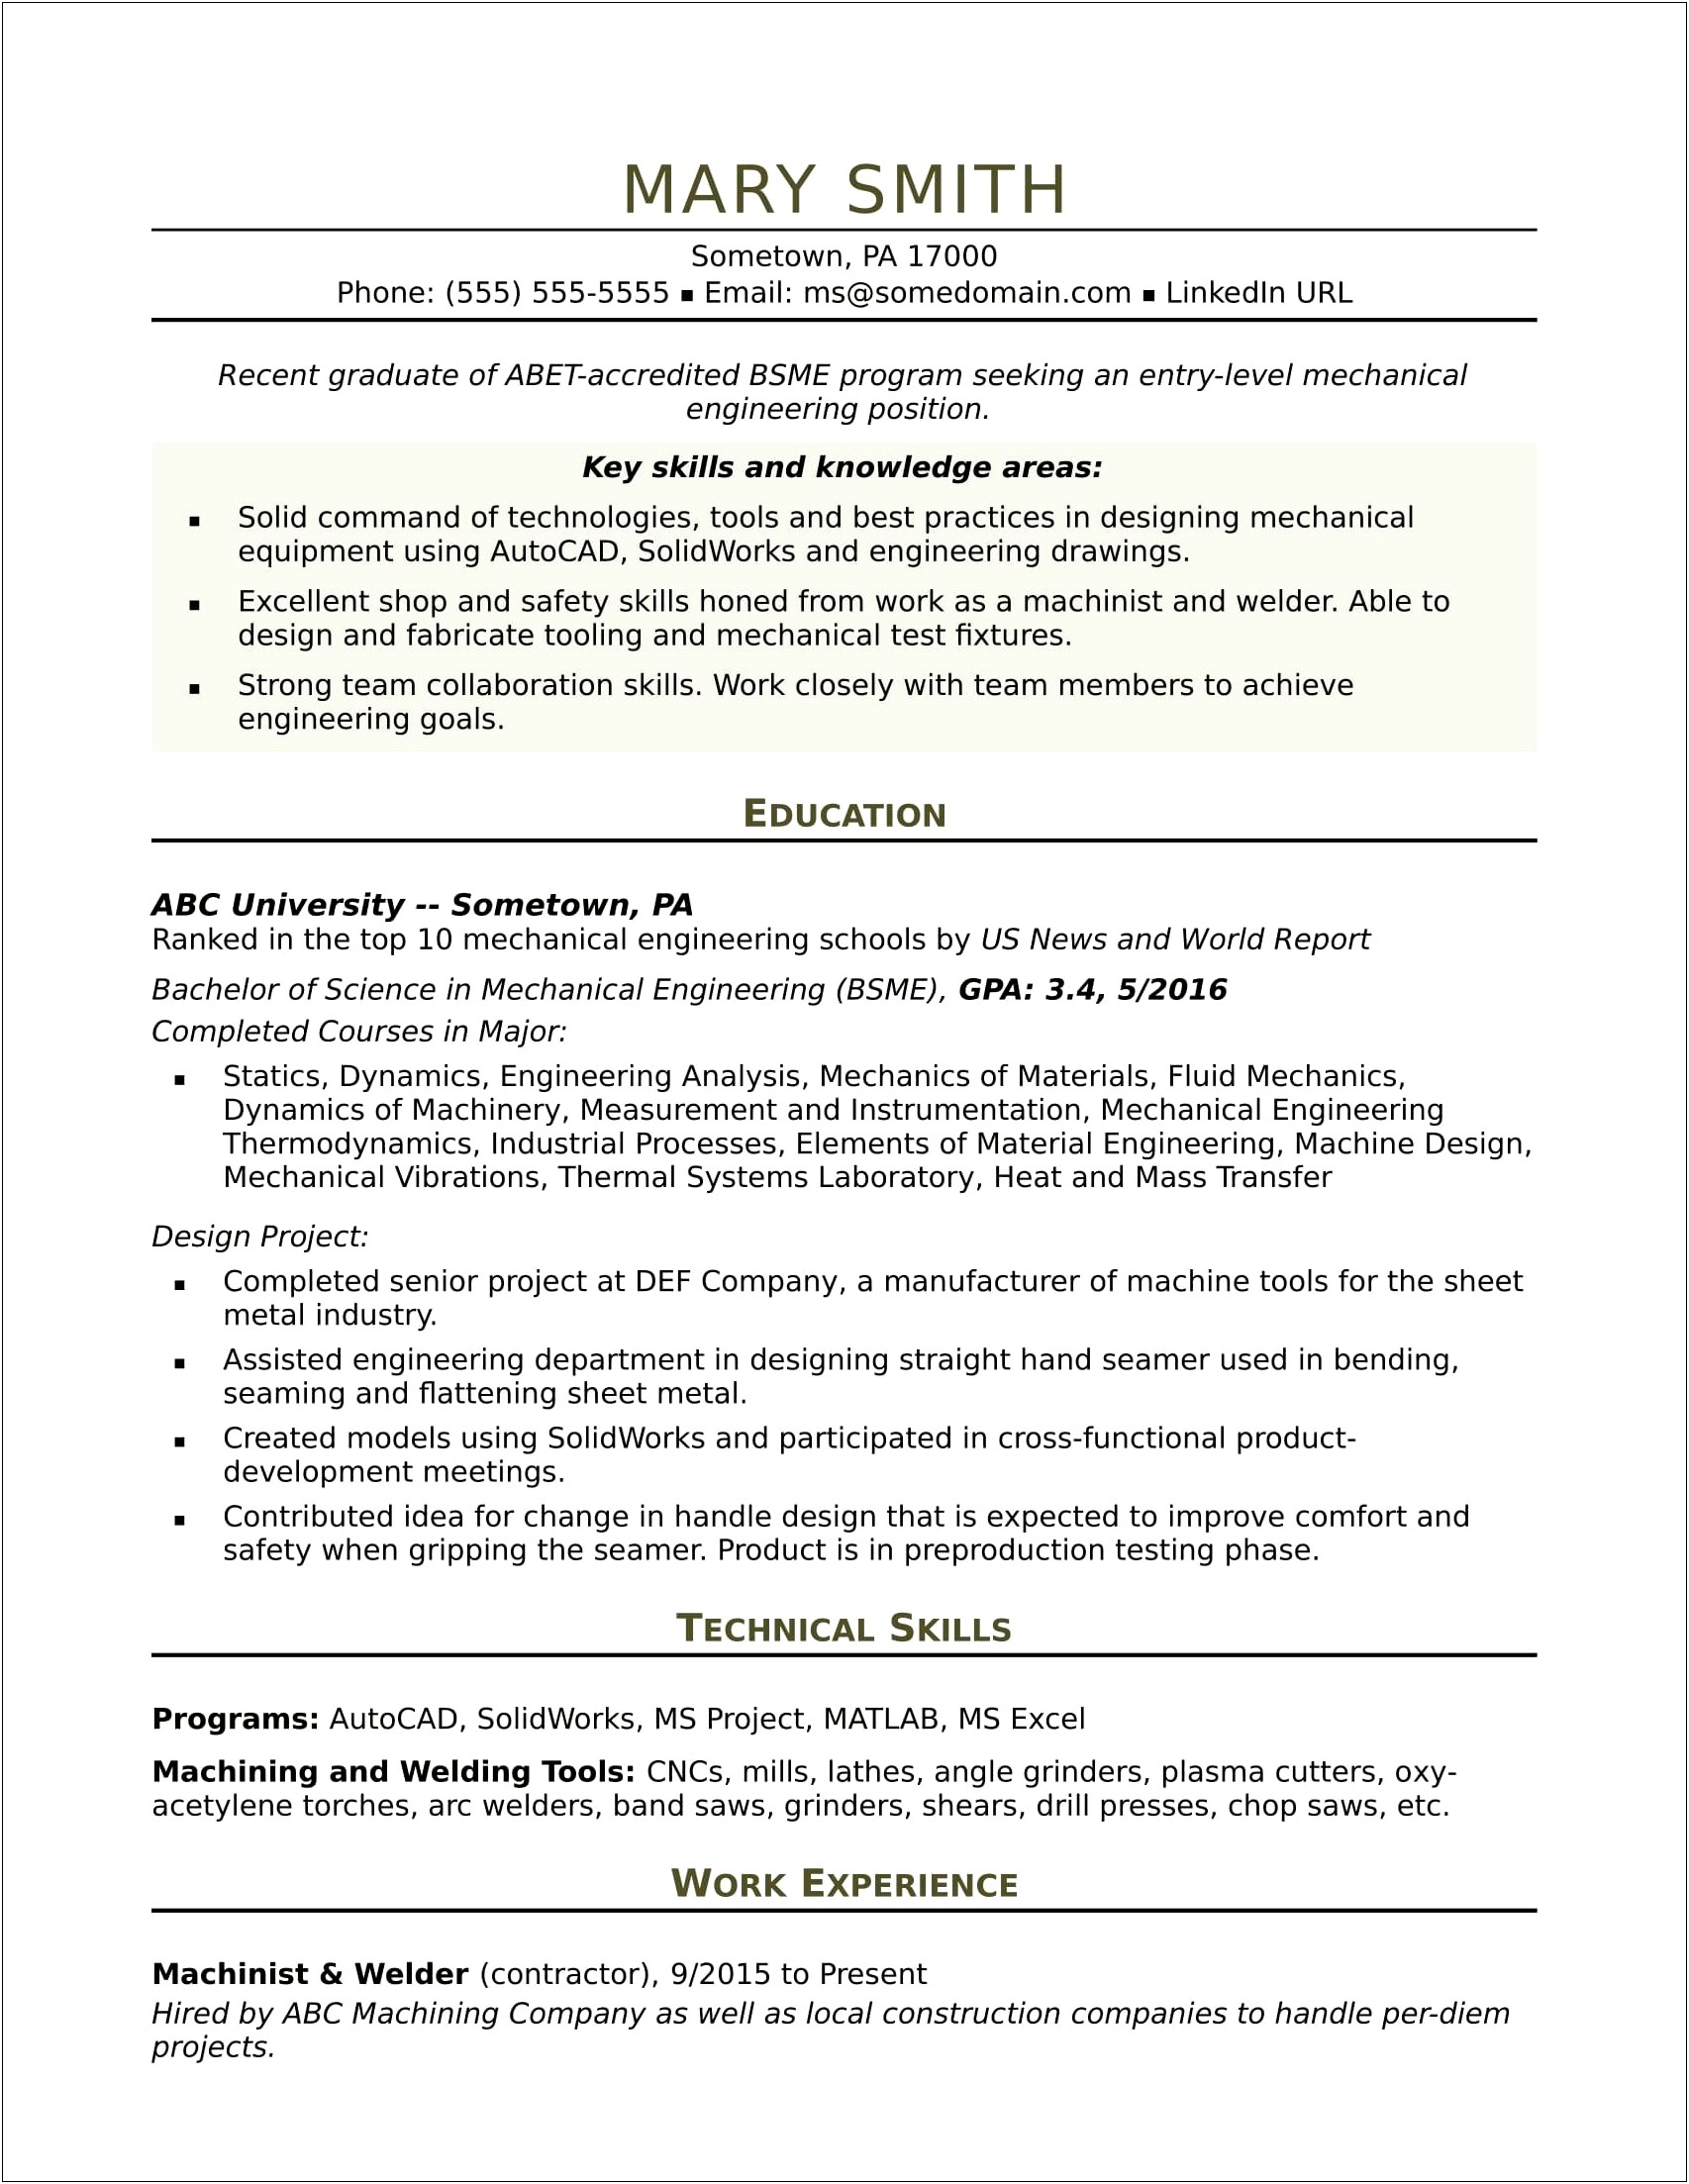 Key Qualifications Examples For Resume